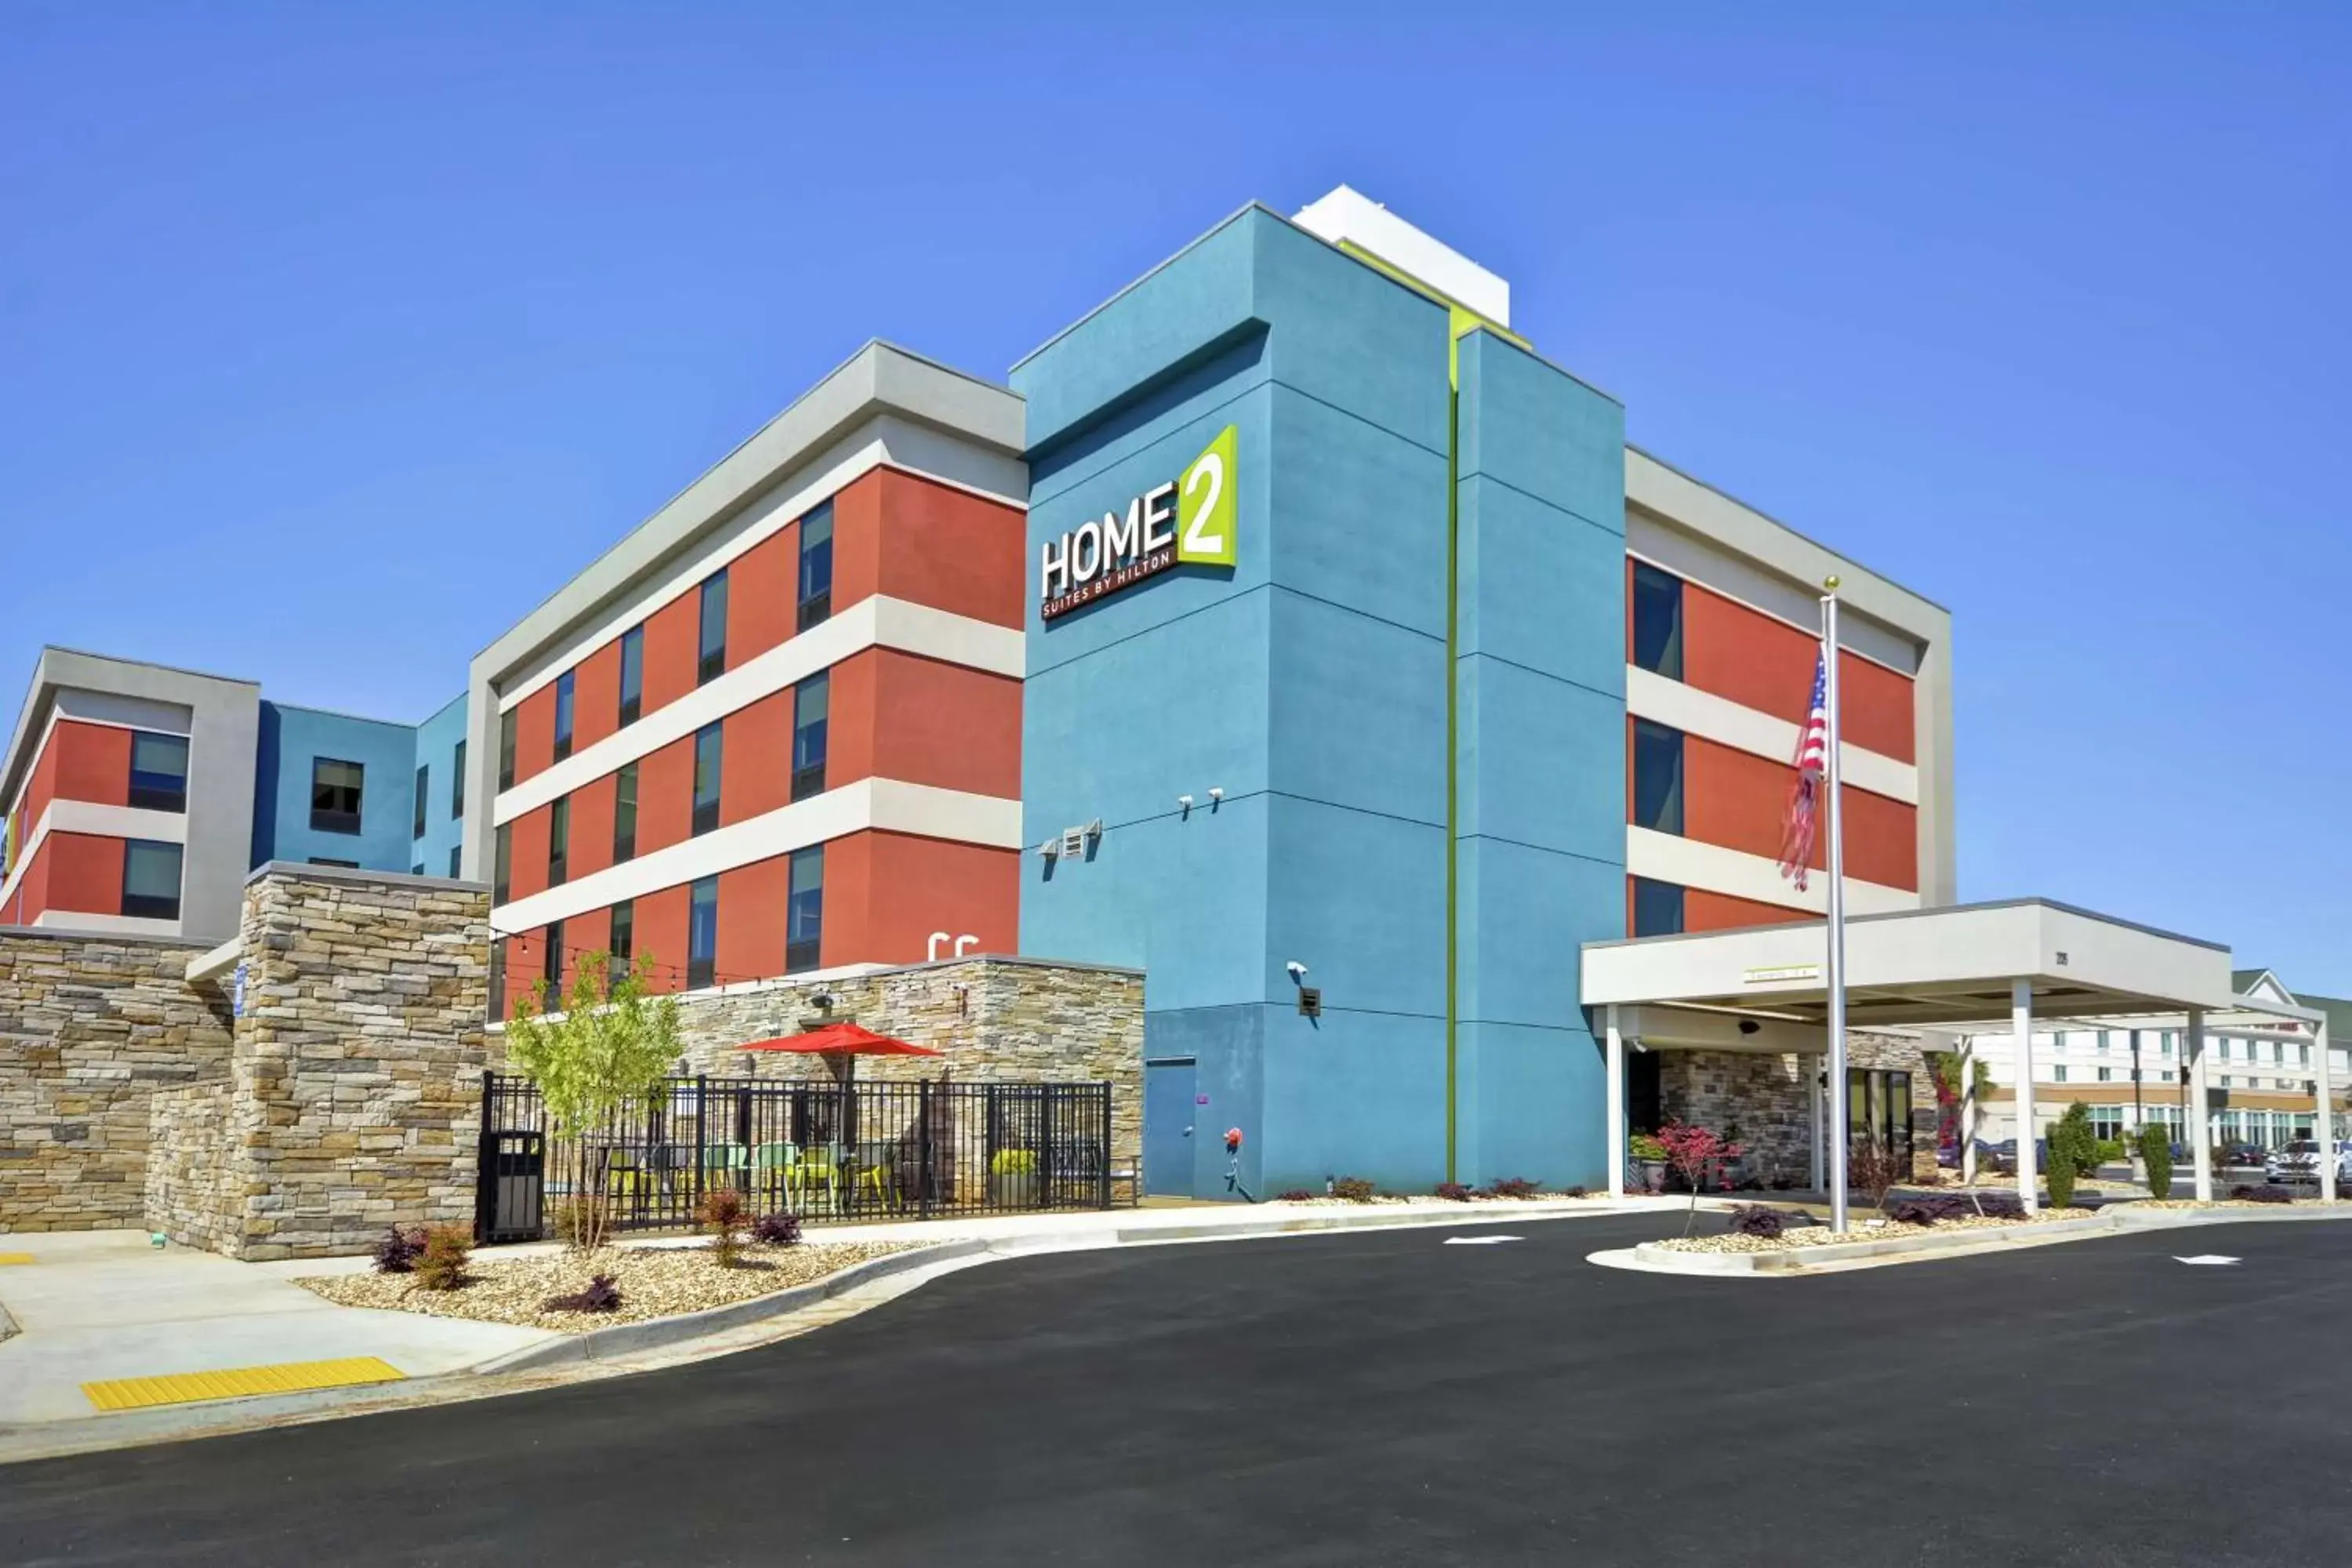 Property Building in Home2 Suites By Hilton Warner Robins